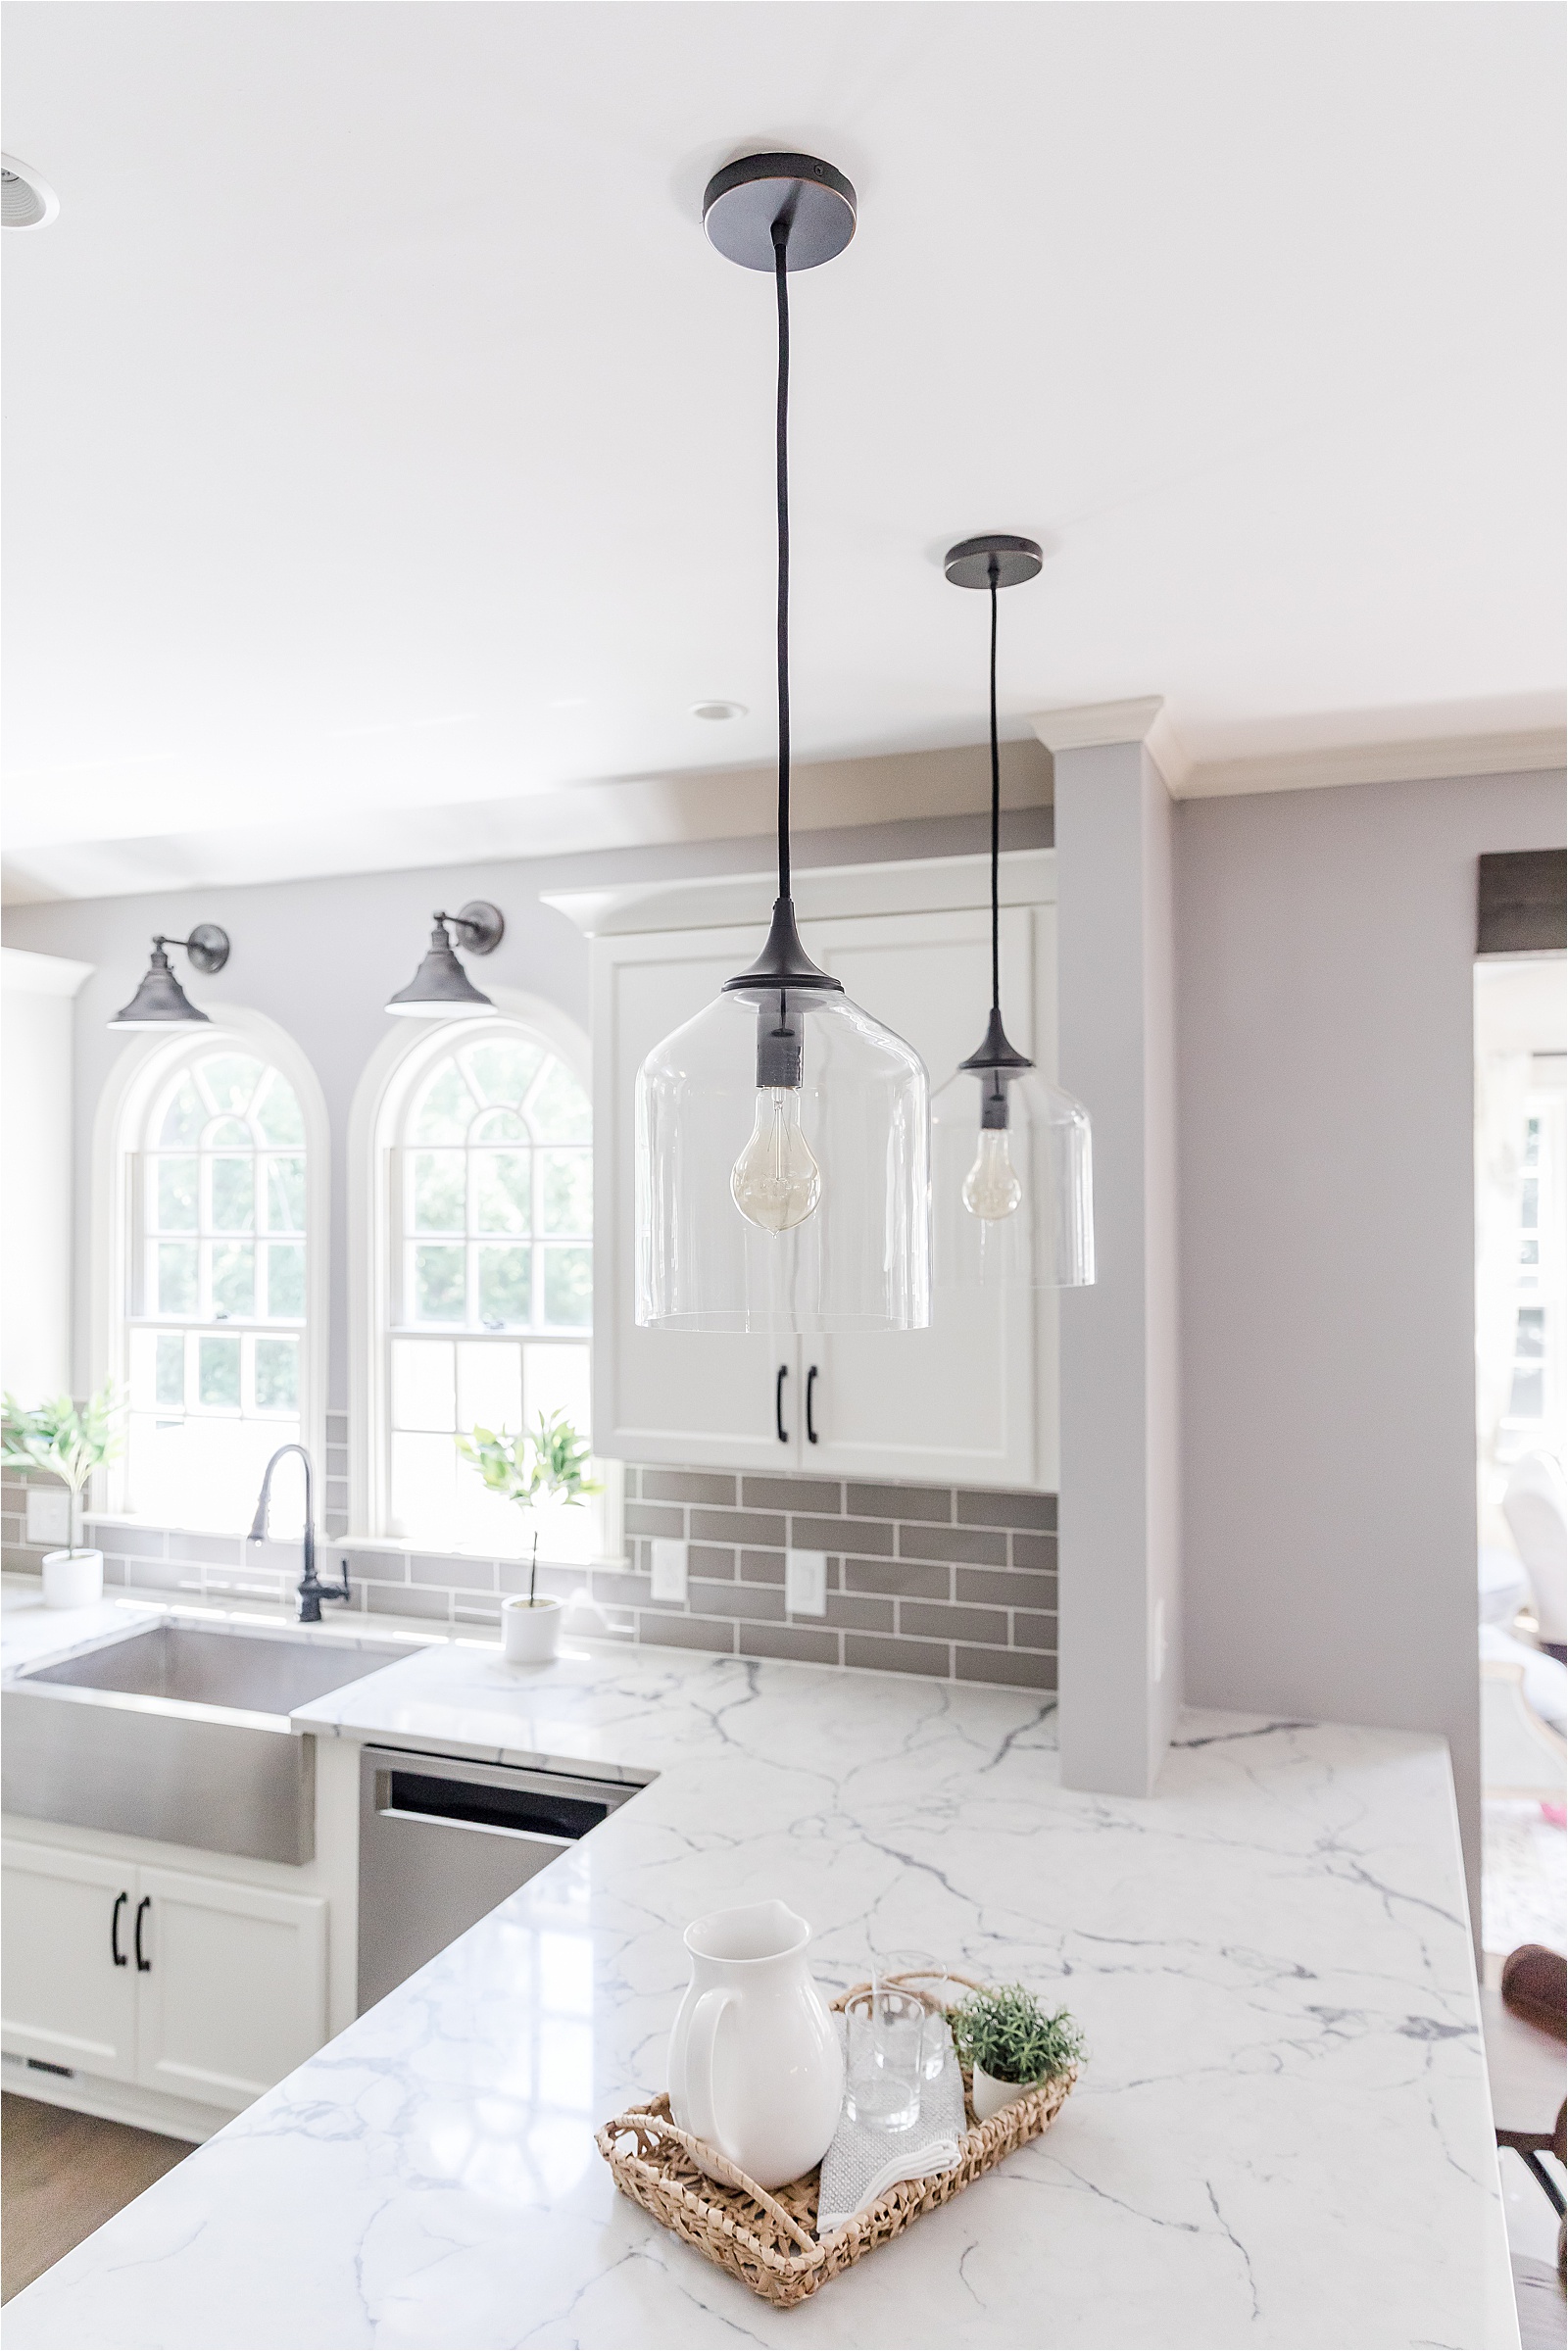 Glass pendant lights about white peninsula in kitchen